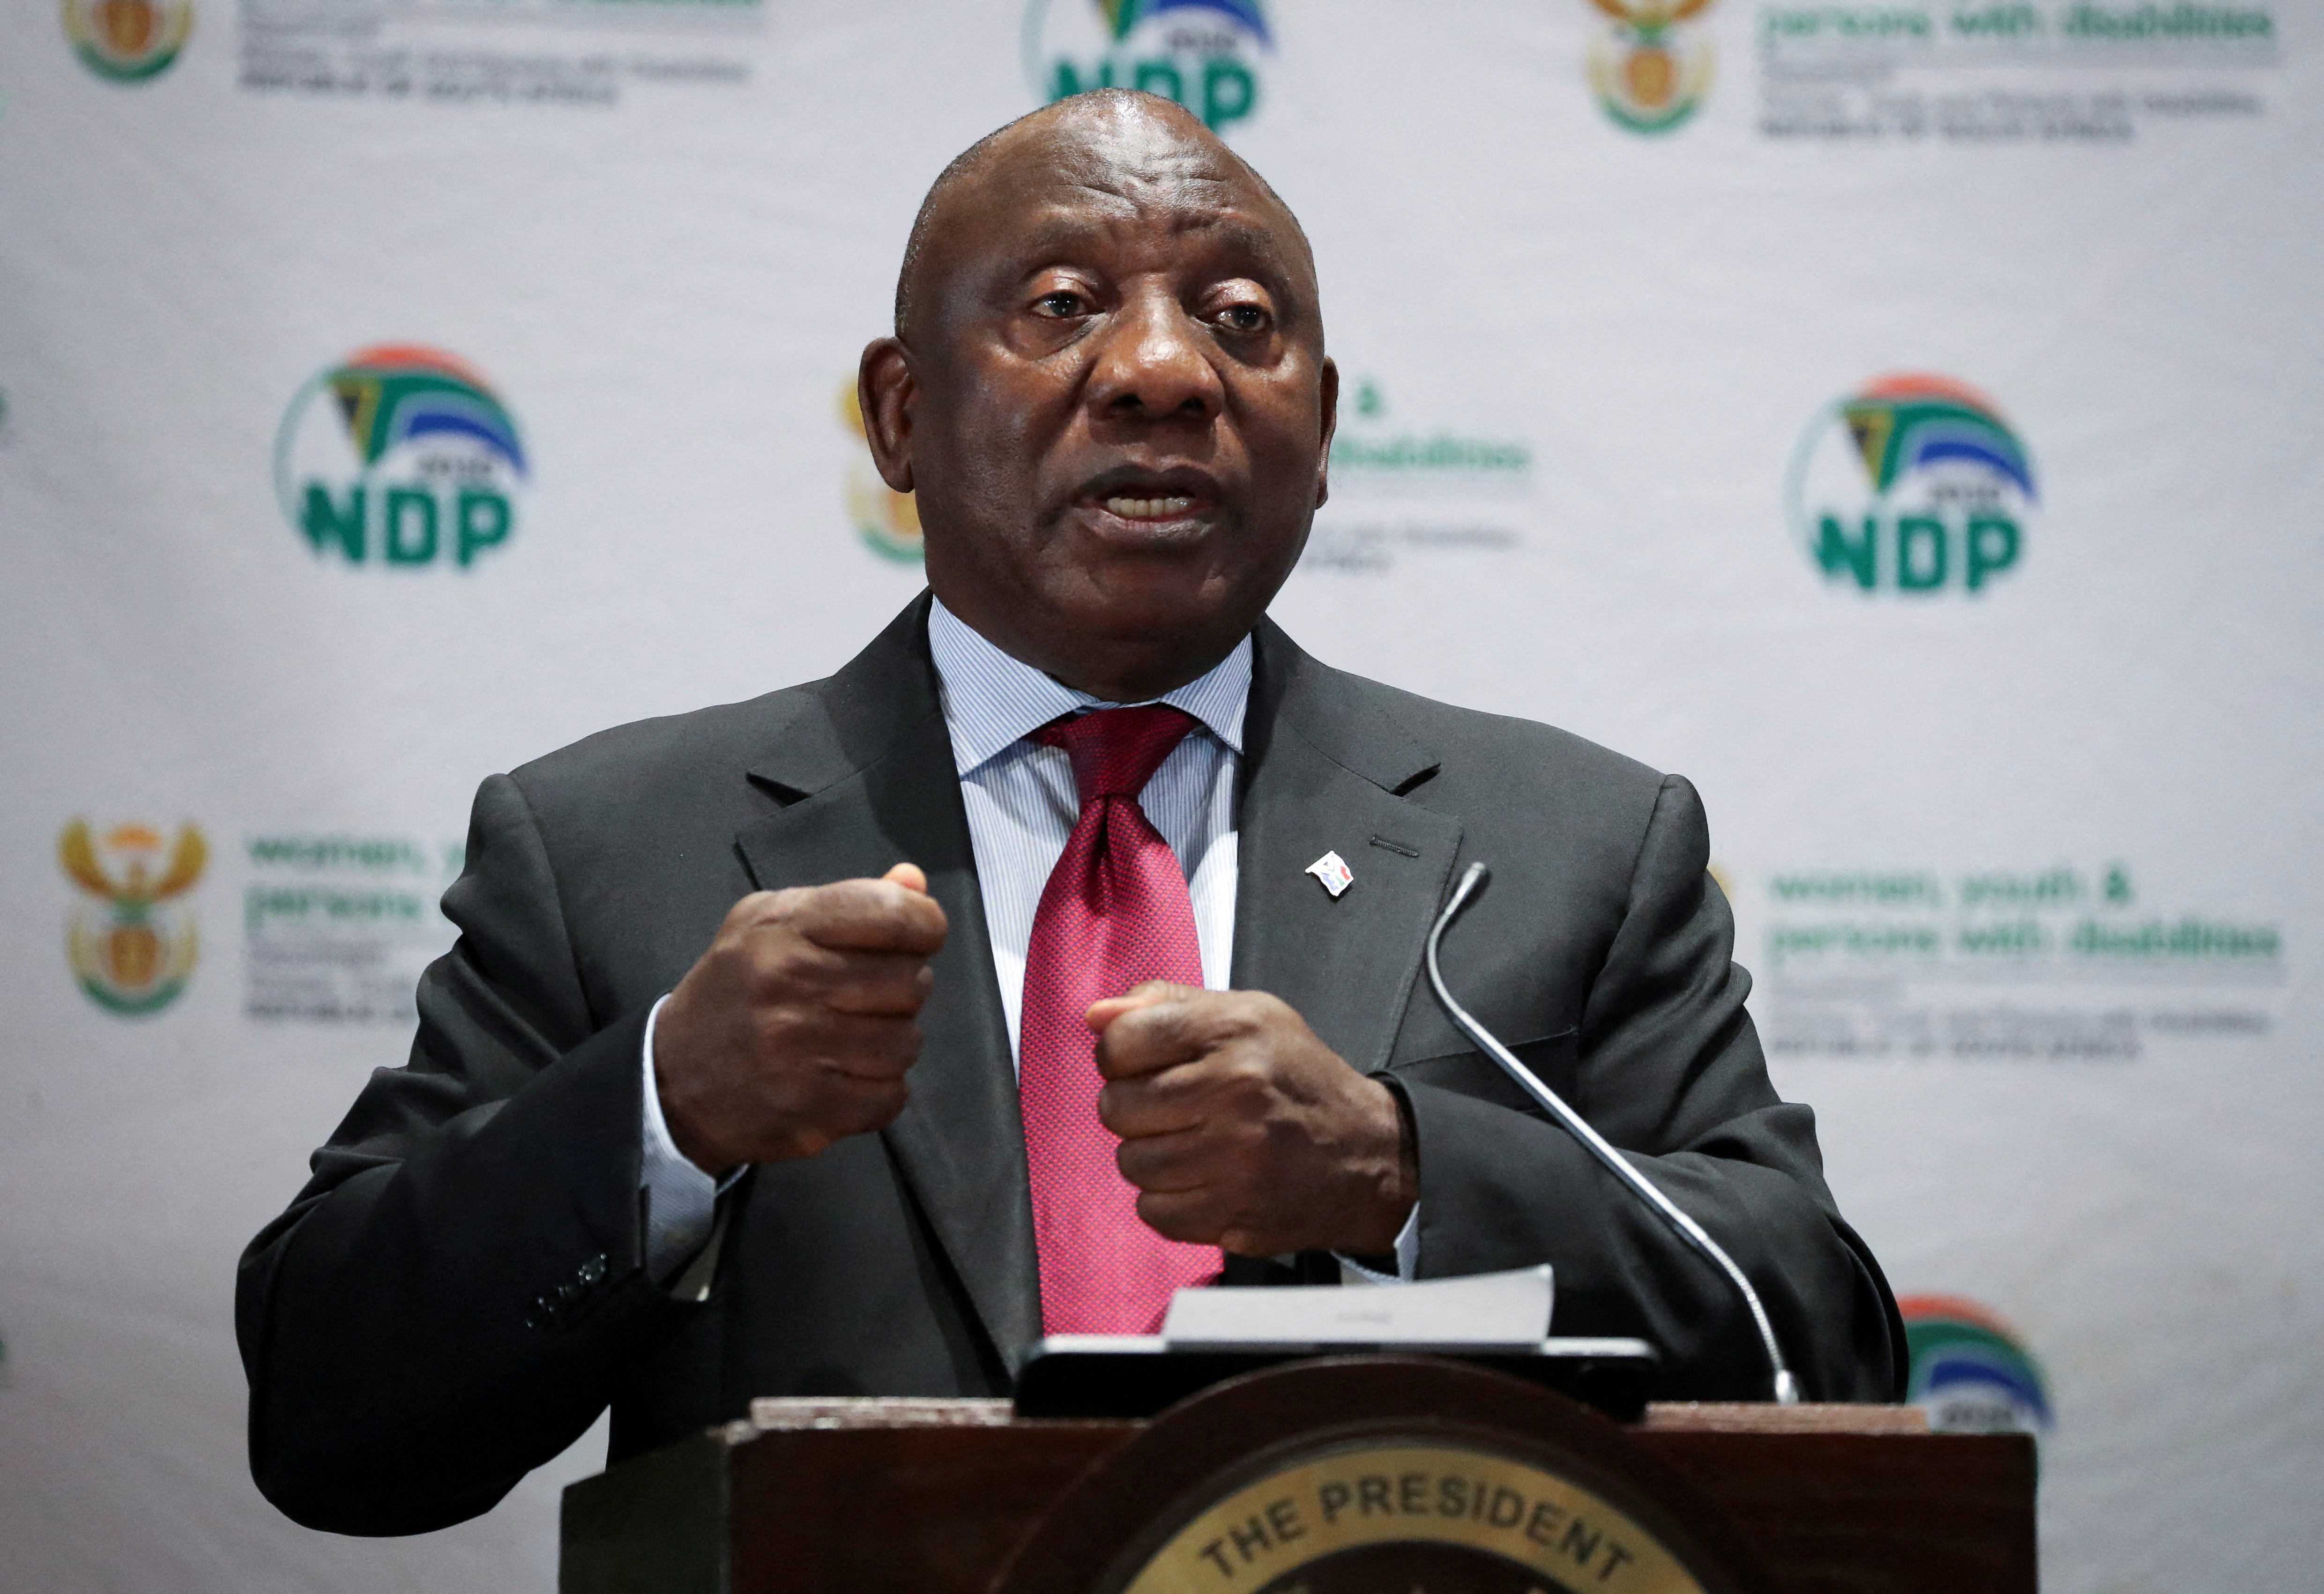 South African President Cyril Ramaphosa speaks at the Summit on Economic Empowerment for Persons with Disabilities in Johannesburg